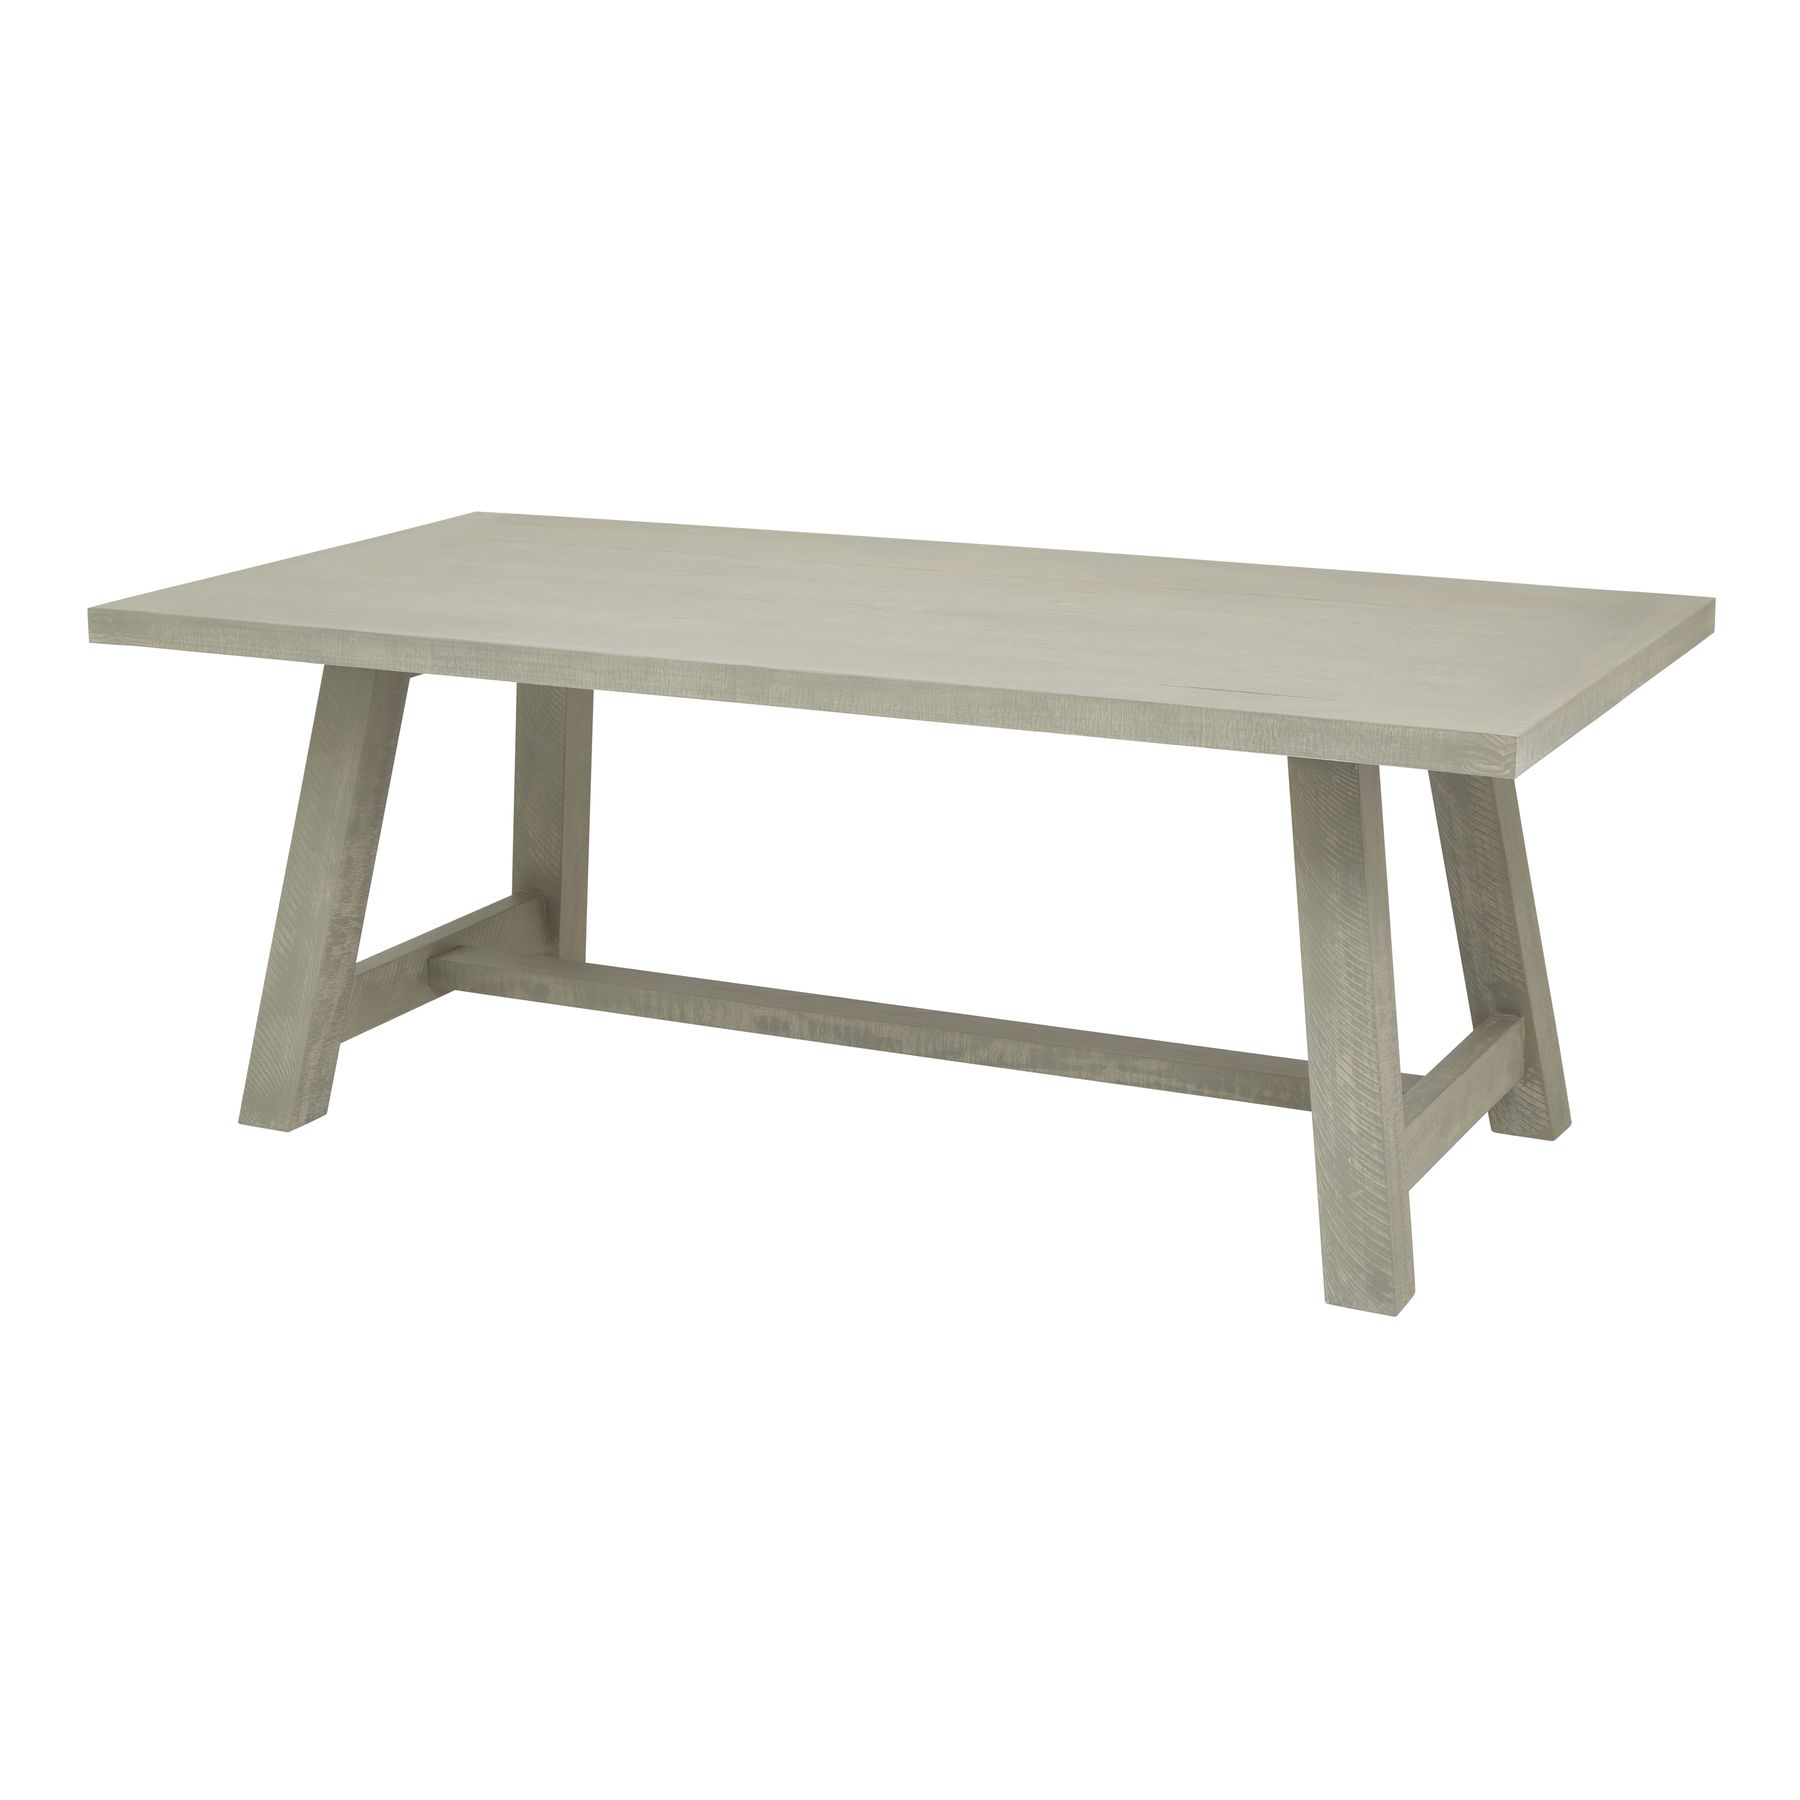 Saltaire Collection Rectangular Dining Table - Image 1